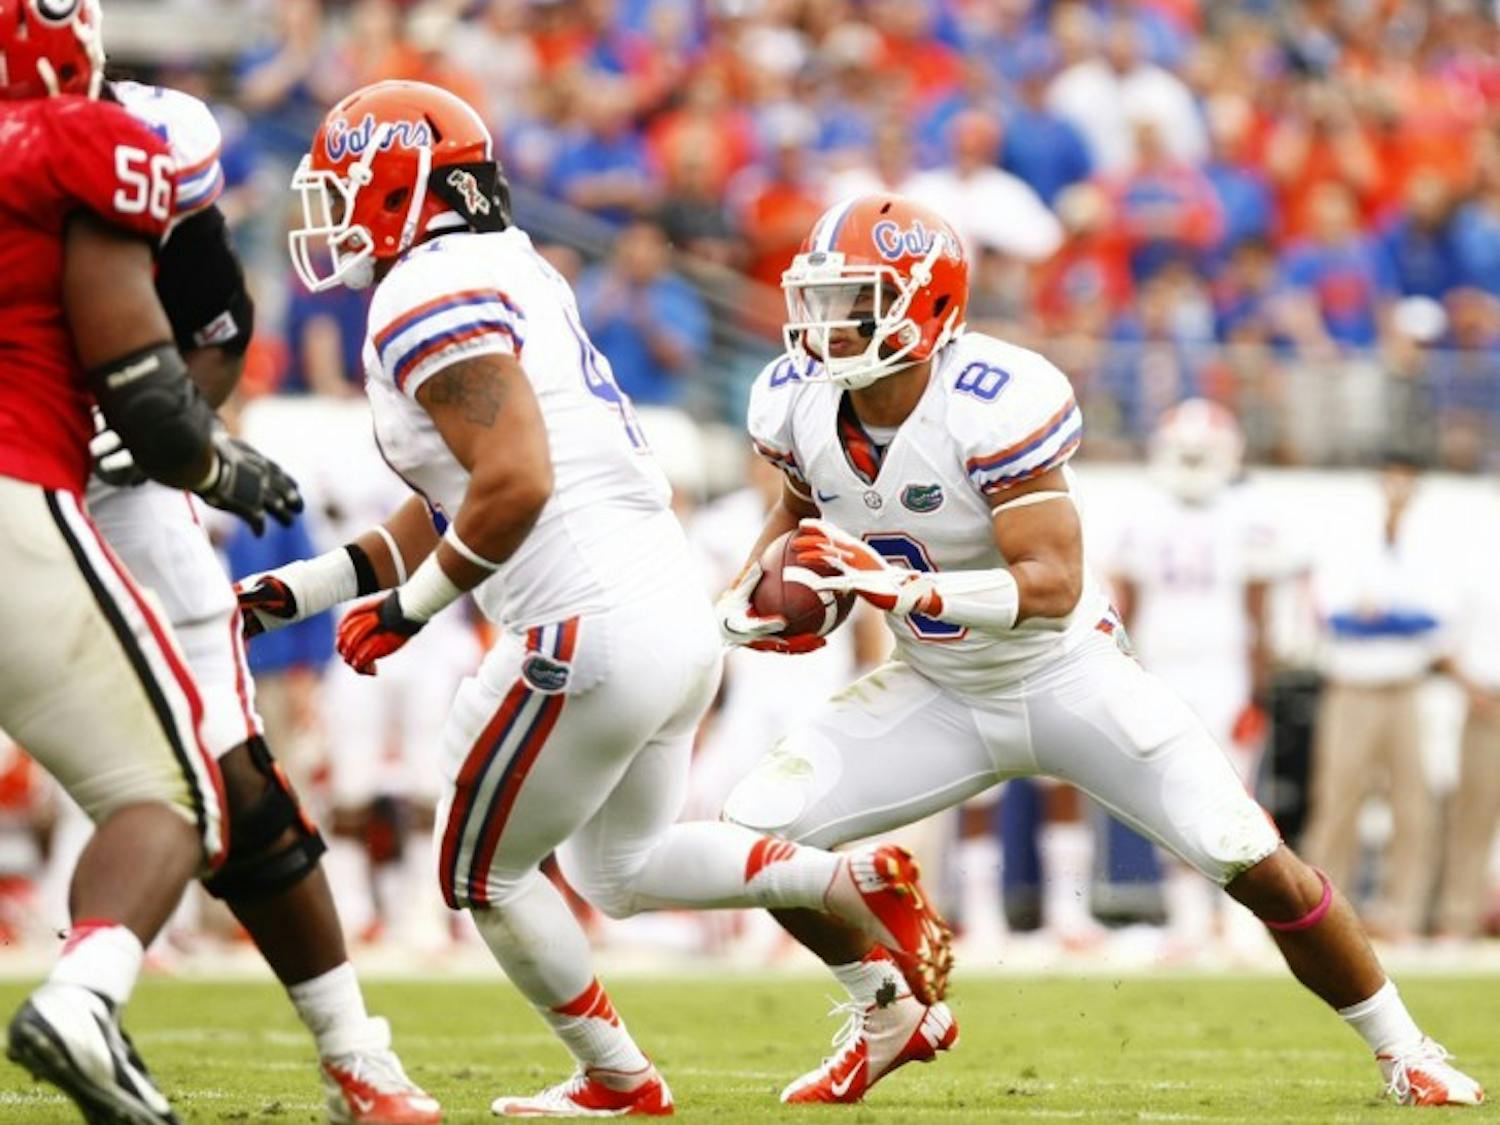 Trey Burton (8) runs after a taking a direct snap in the wildcat formation during Florida’s 17-9 loss to Georgia on Saturday at EverBank Field in Jacksonville.